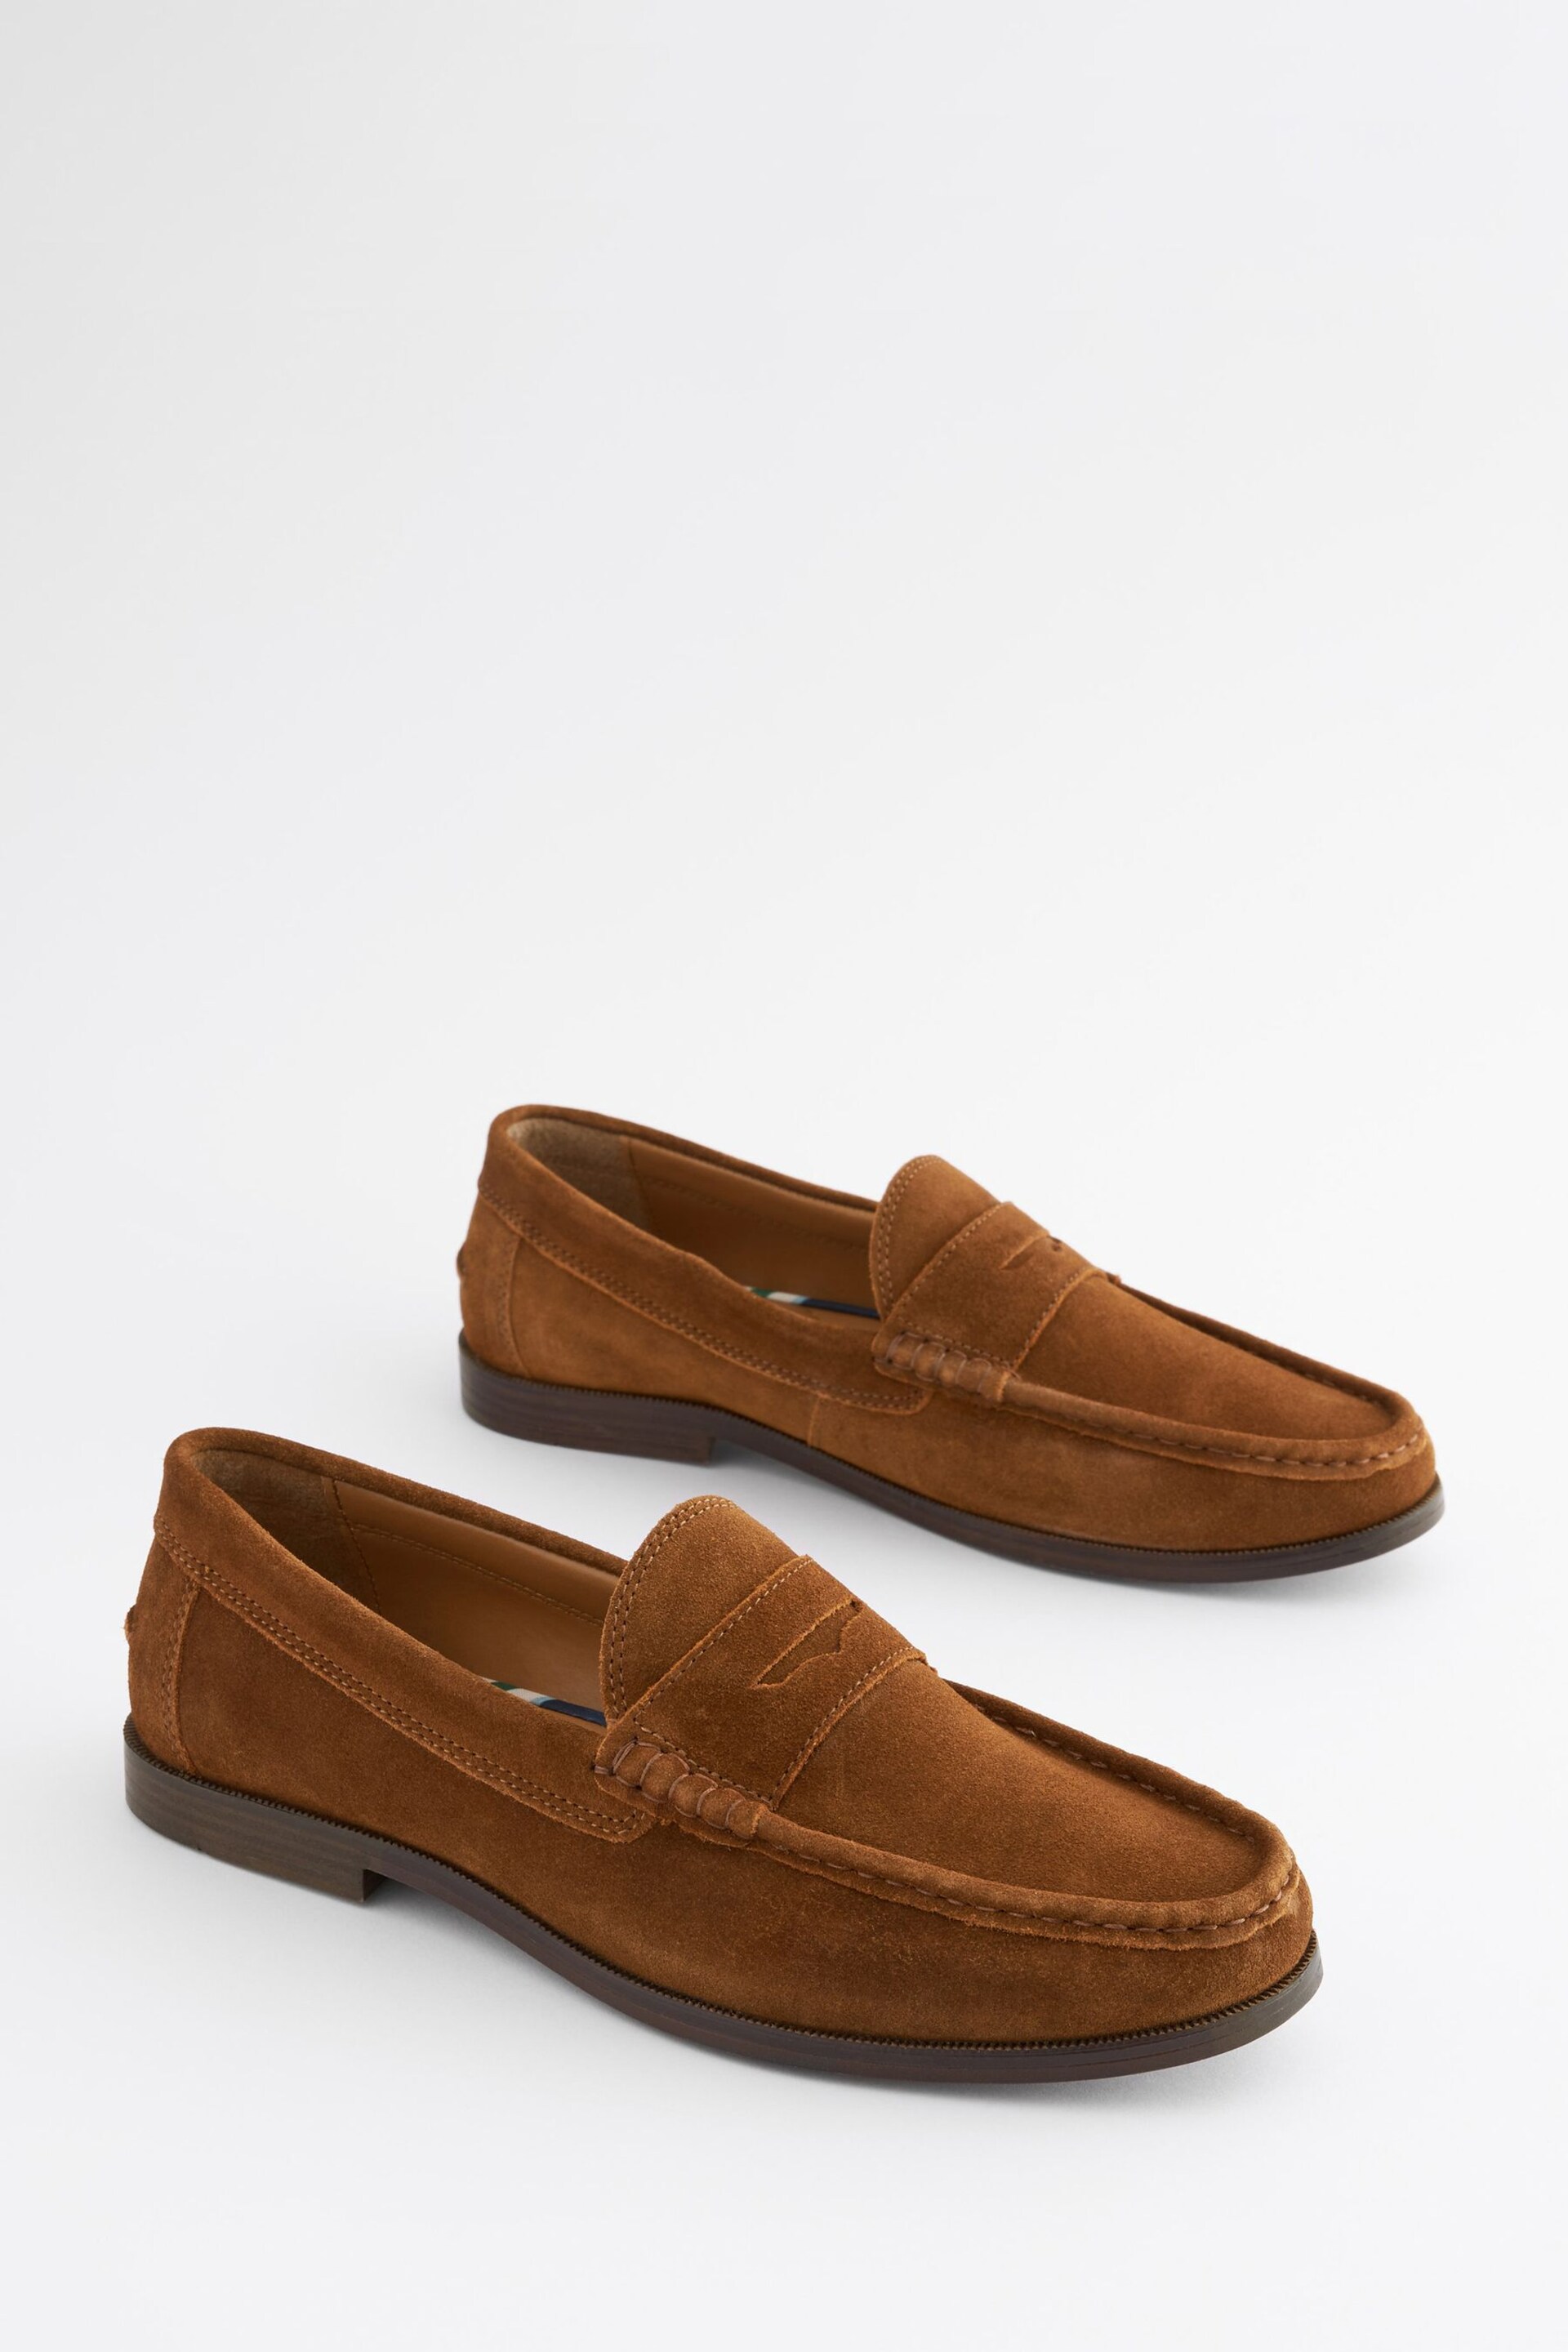 Brown Suede Regular Fit Penny Loafers - Image 4 of 10